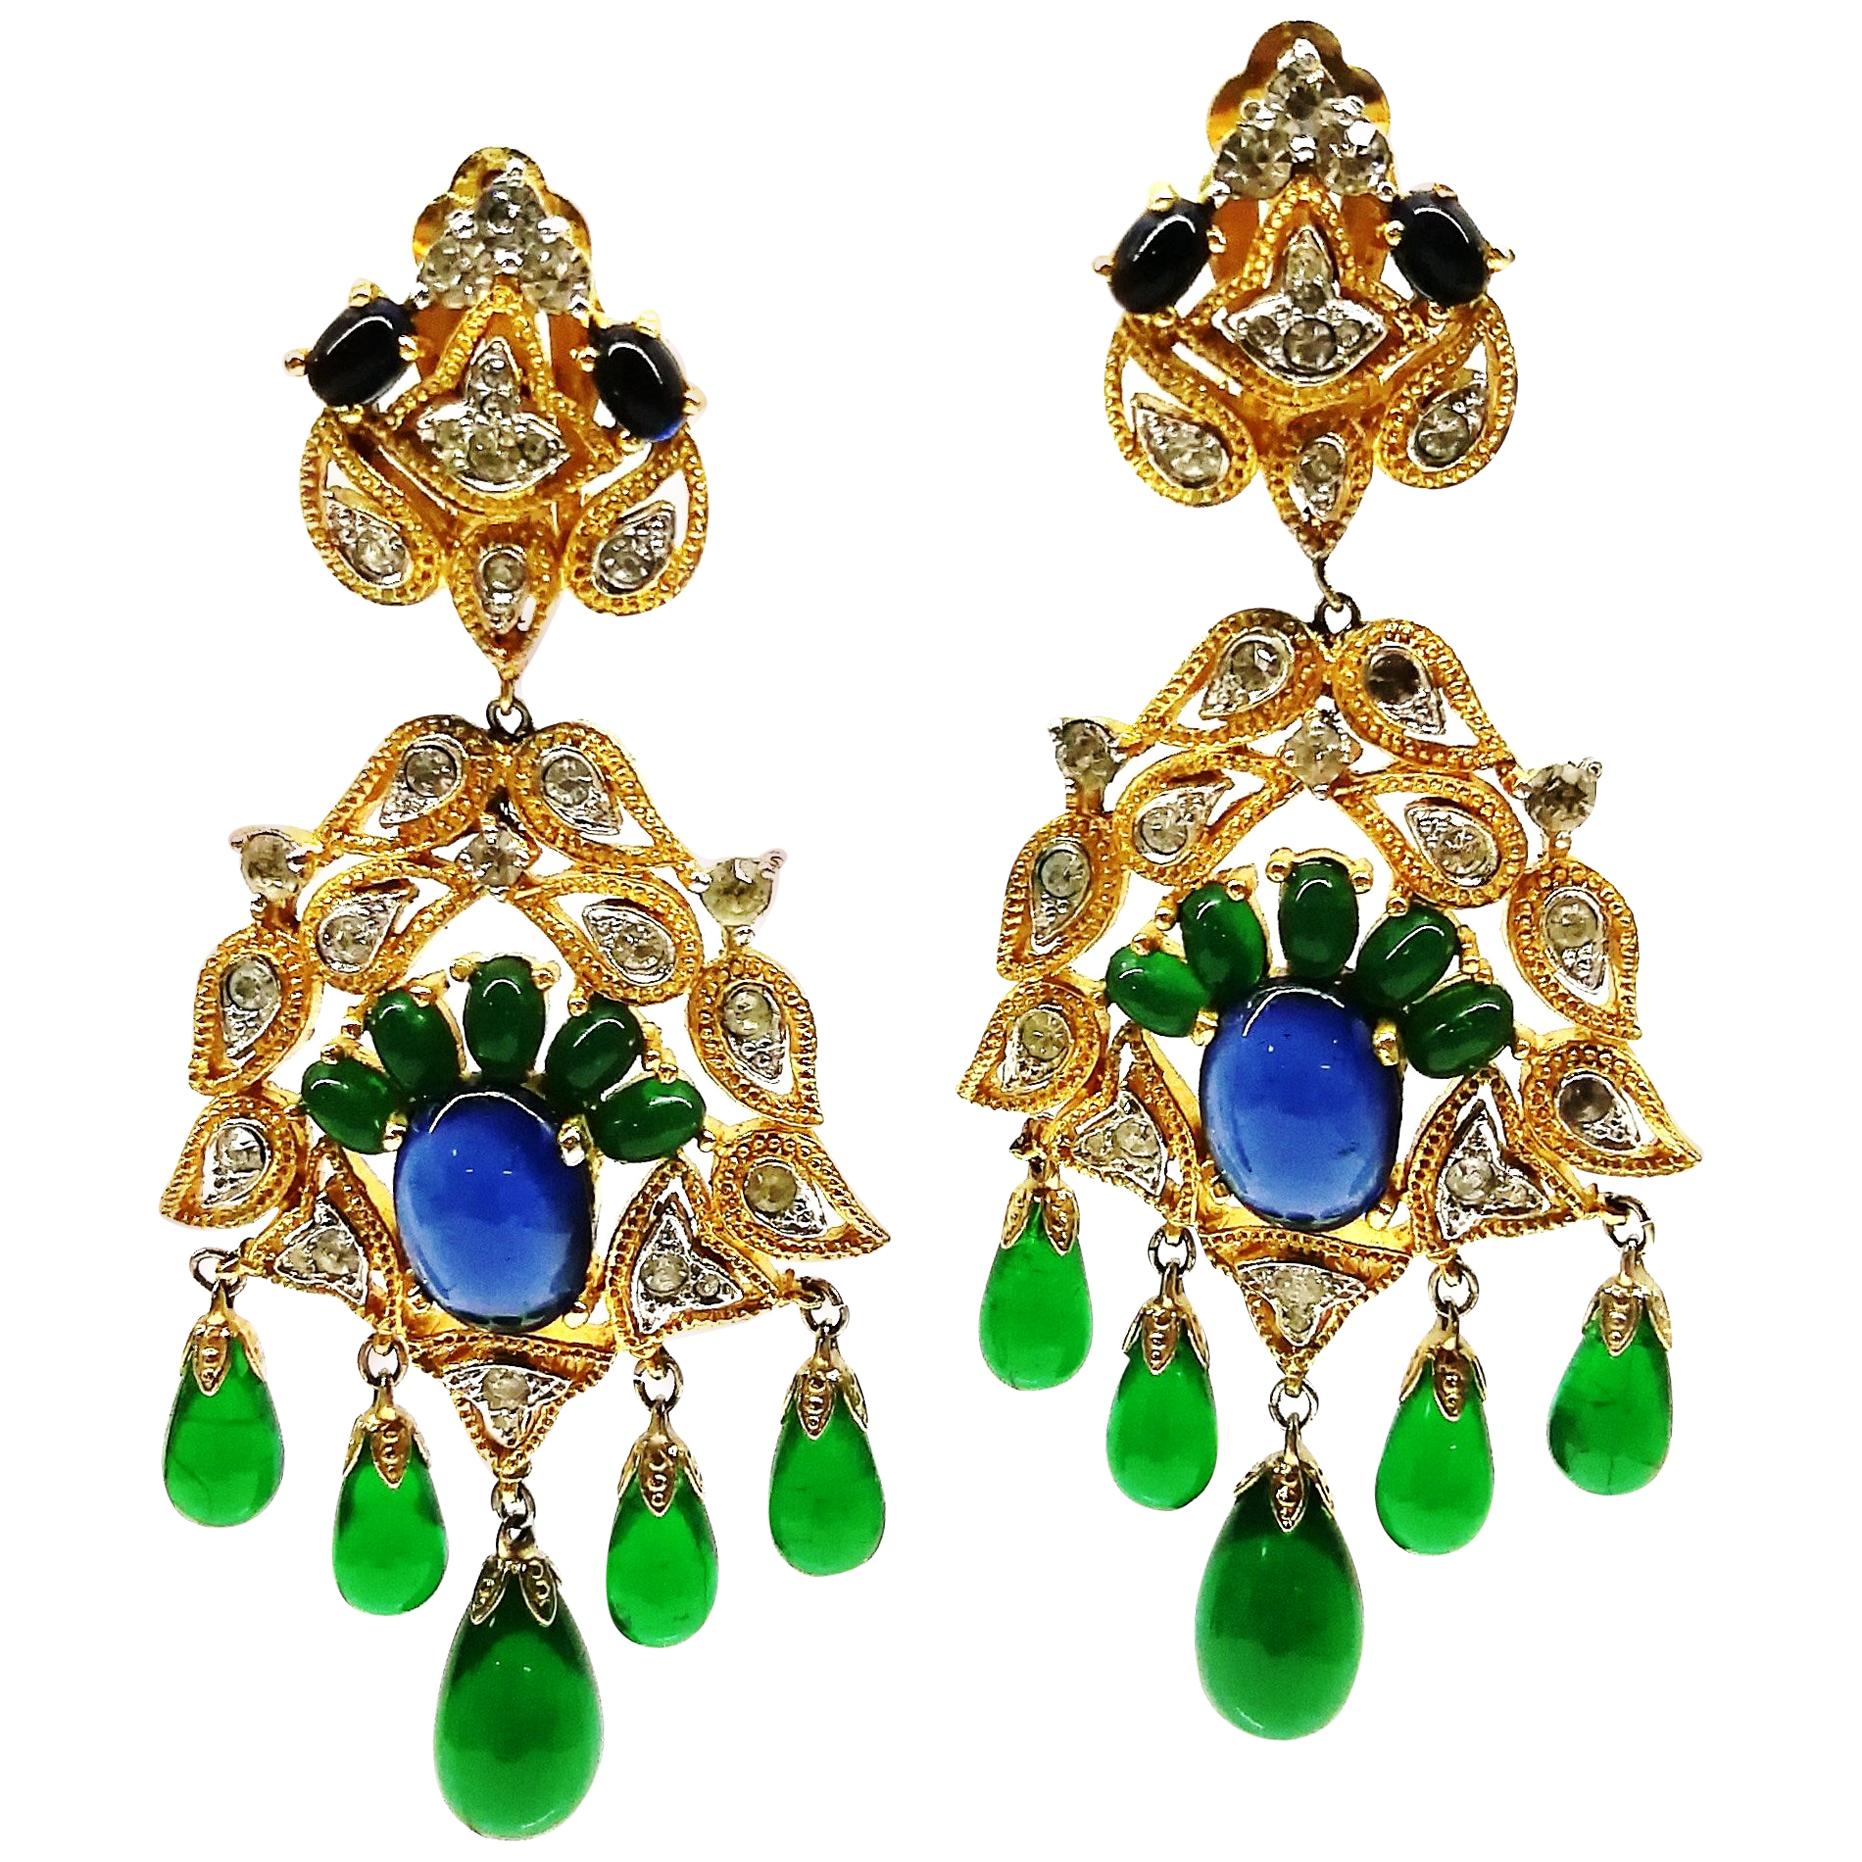 Large Moghul-style gilt metal and coloured paste drop earrings, Mazer, 1960s